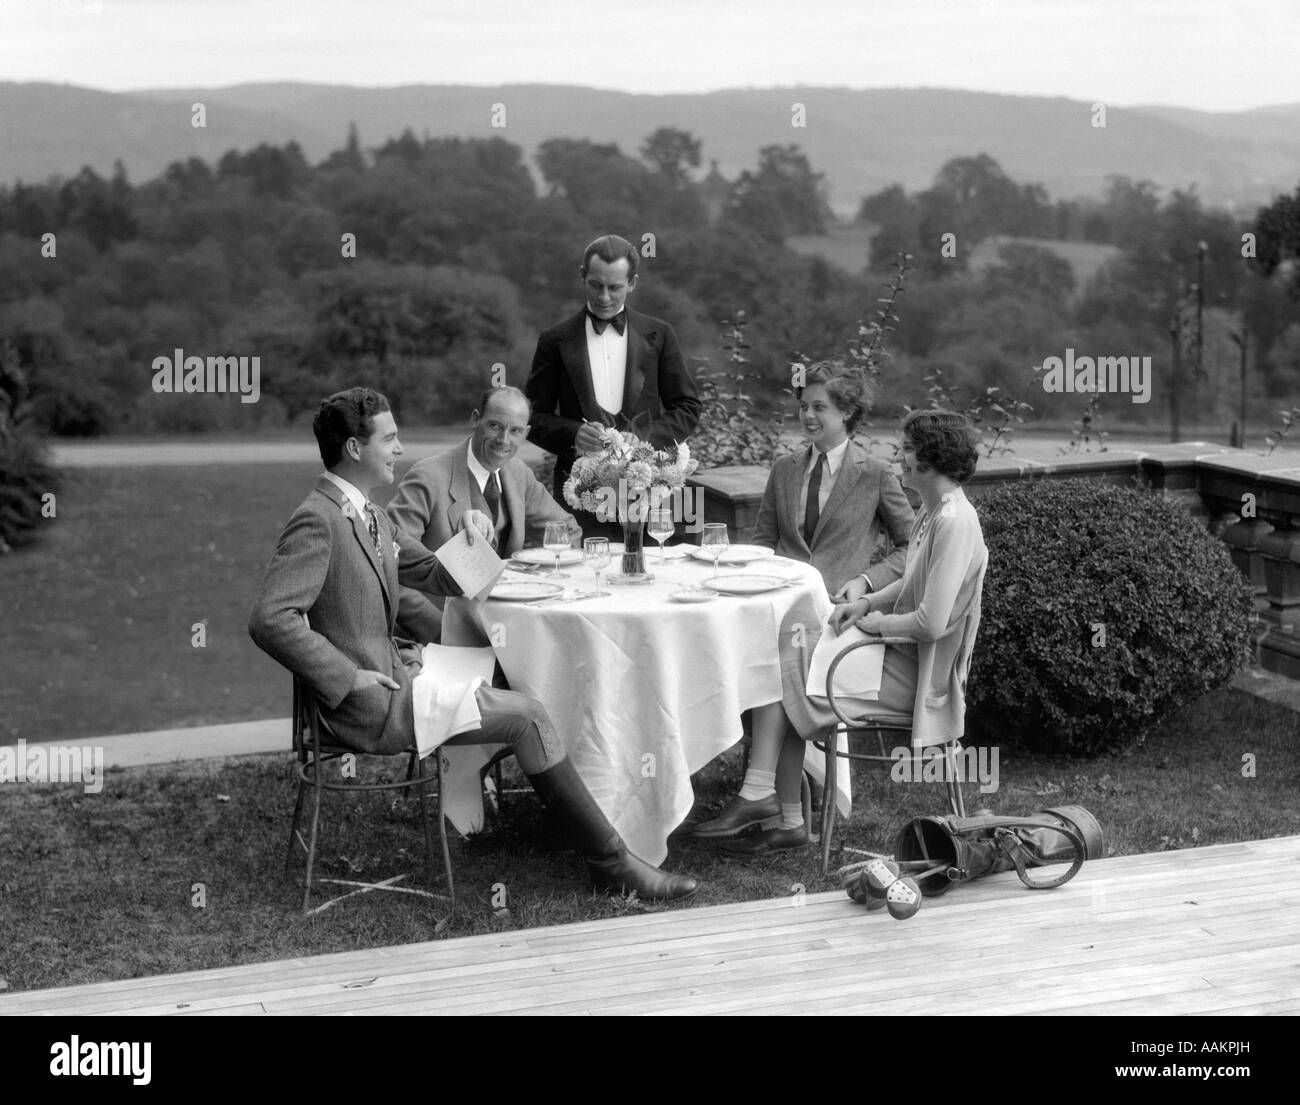 1920s 1930s COUNTRY CLUB SCENE WITH TWO COUPLES WITH GOLF CLUBS HAVING LUNCH OUTDOORS Stock Photo